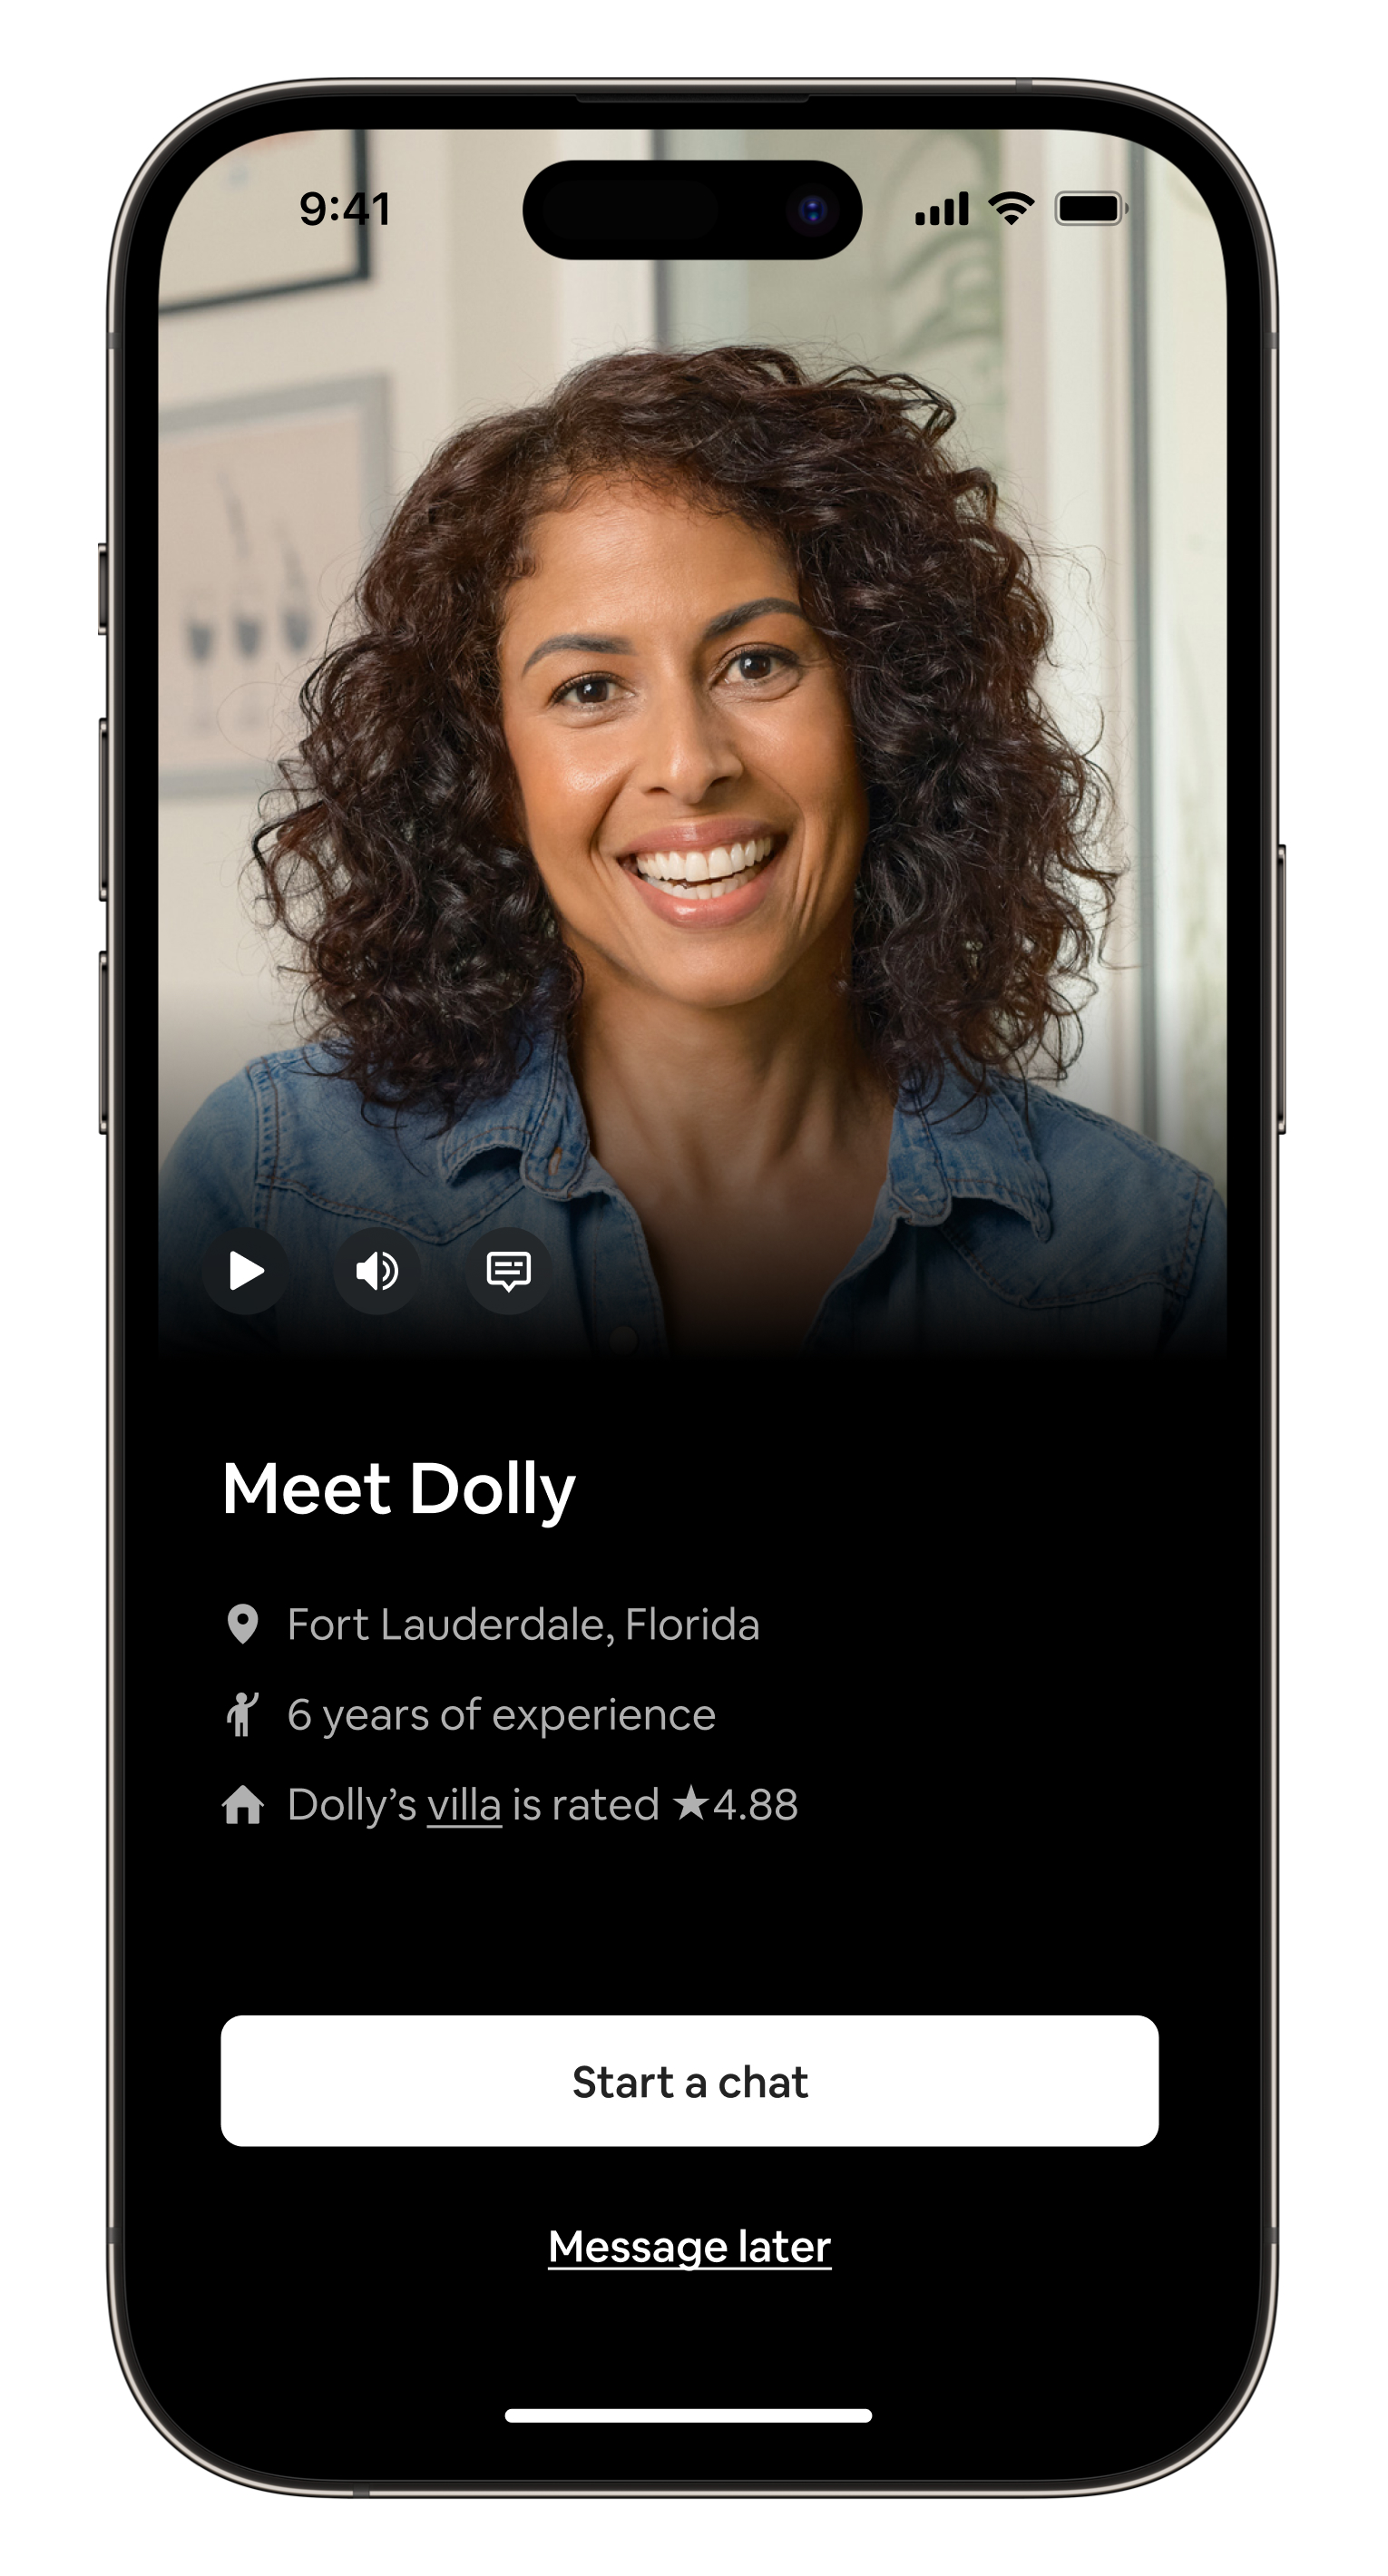 Airbnb Setup featured within the Airbnb app on an iPhone device. Host, Dolly, is featured and the image shows how new Hosts can initiate a conversation with her to help with setting up their listing.